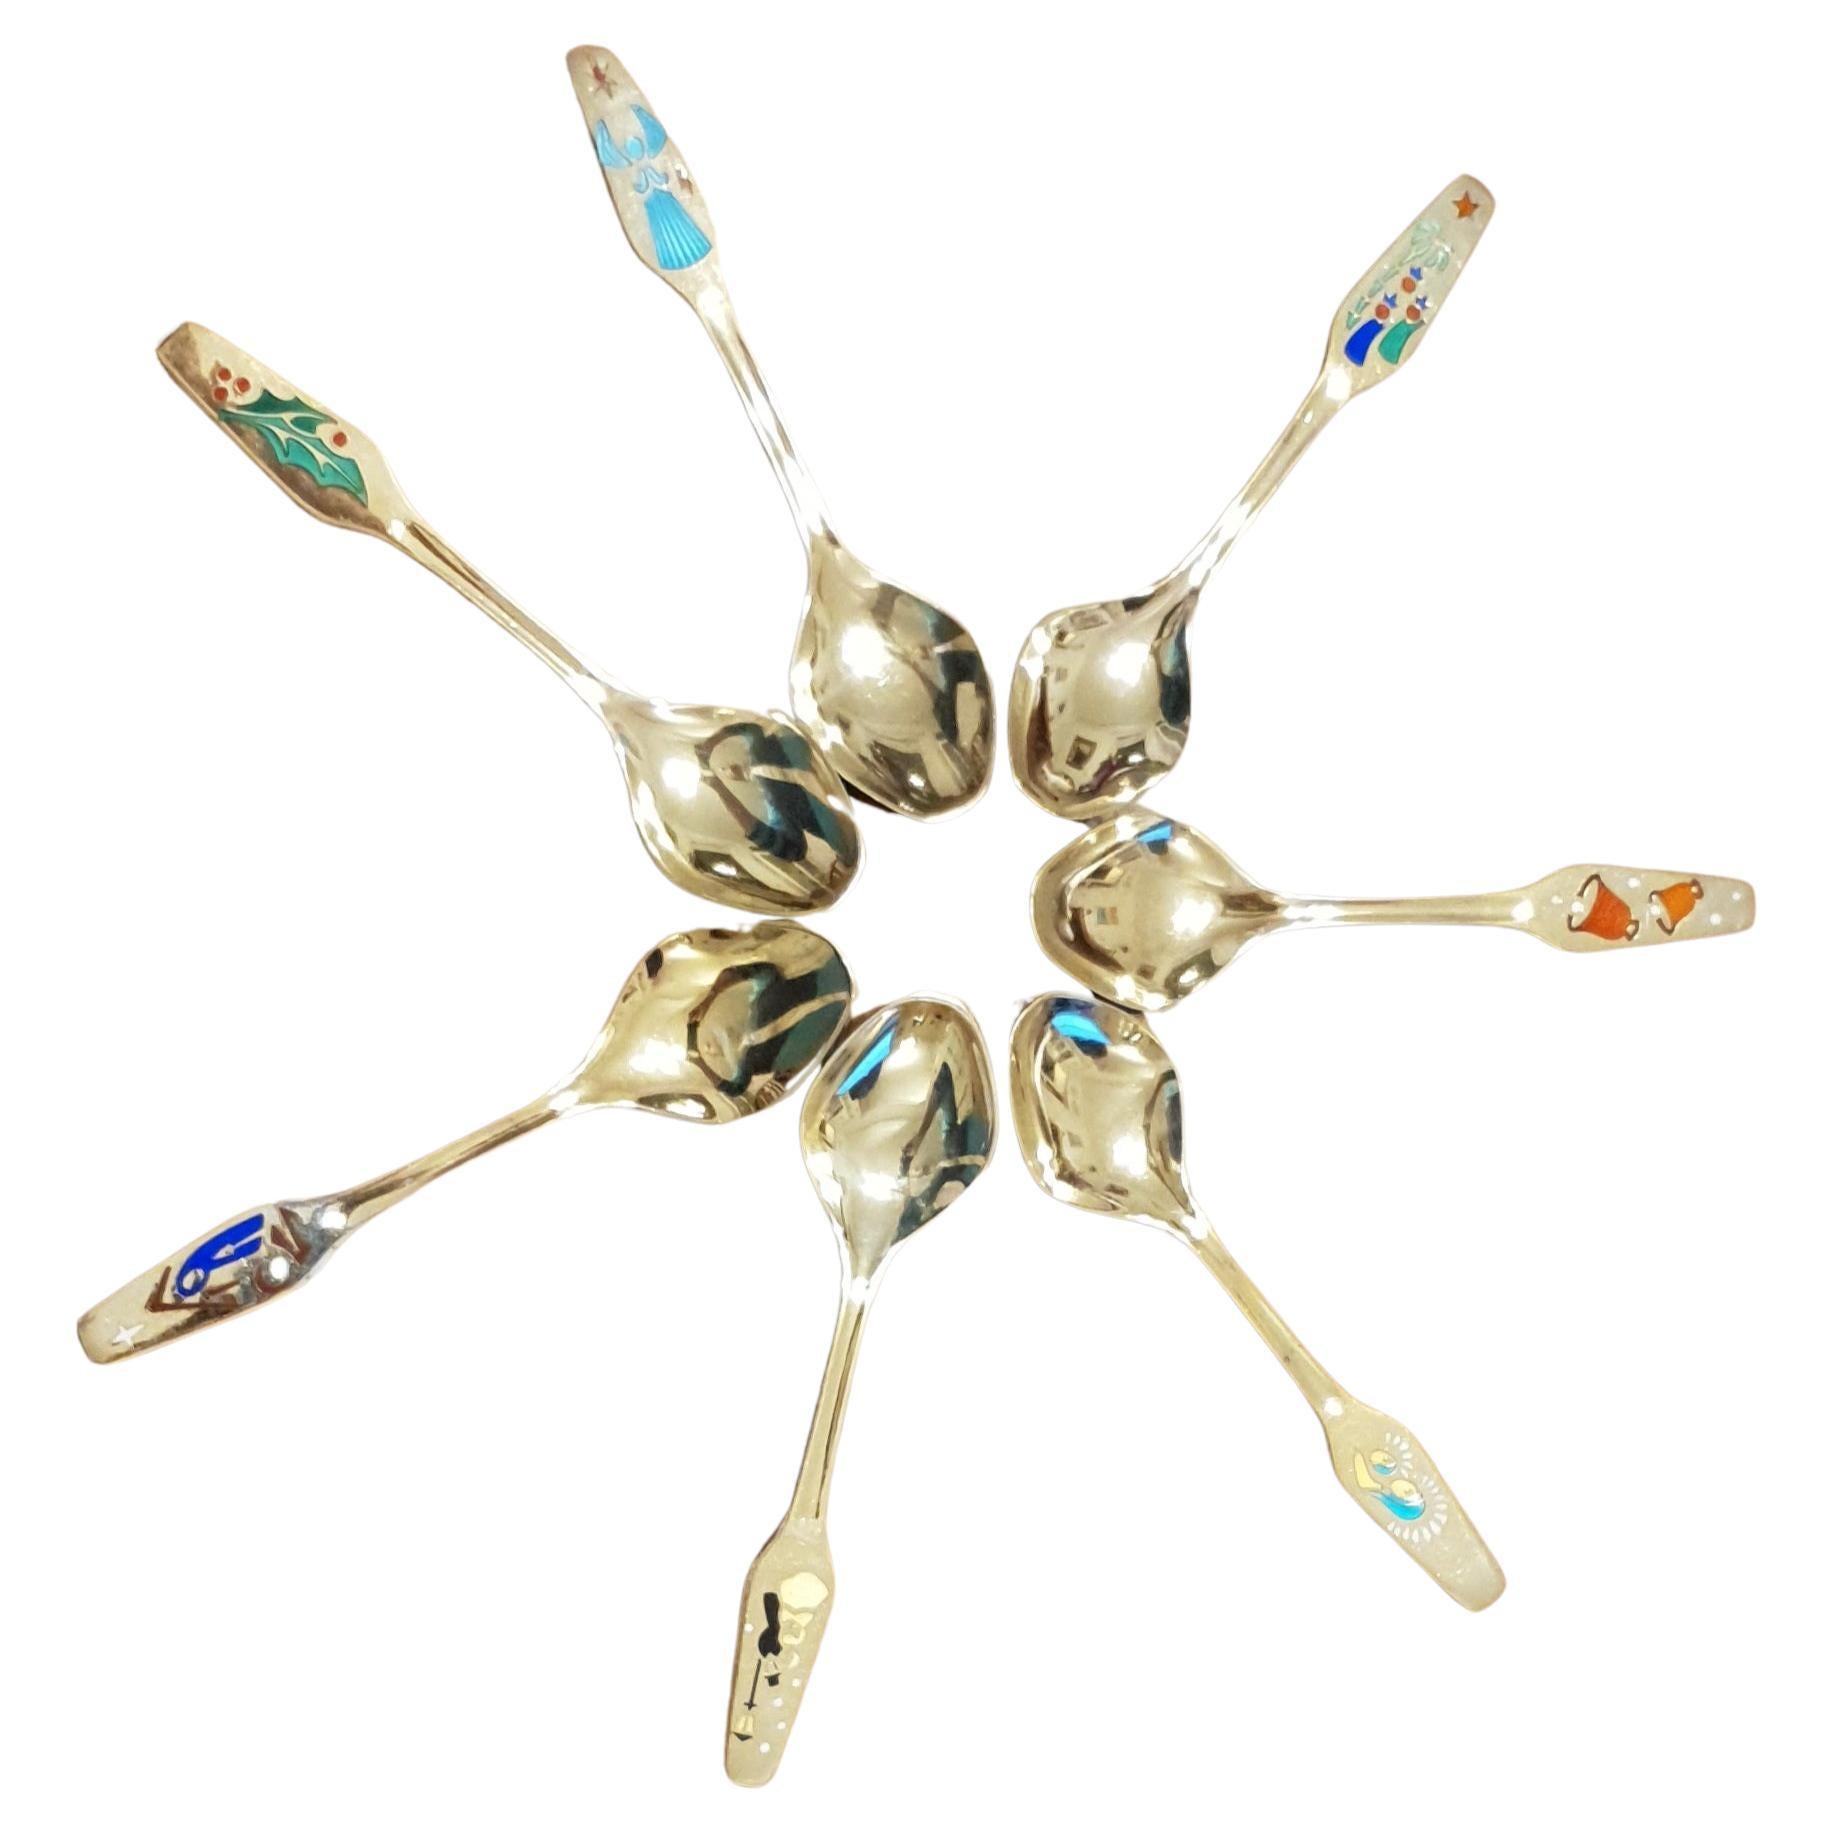 7 sterling silver and enamel christmas spoons by Meka, Denmark